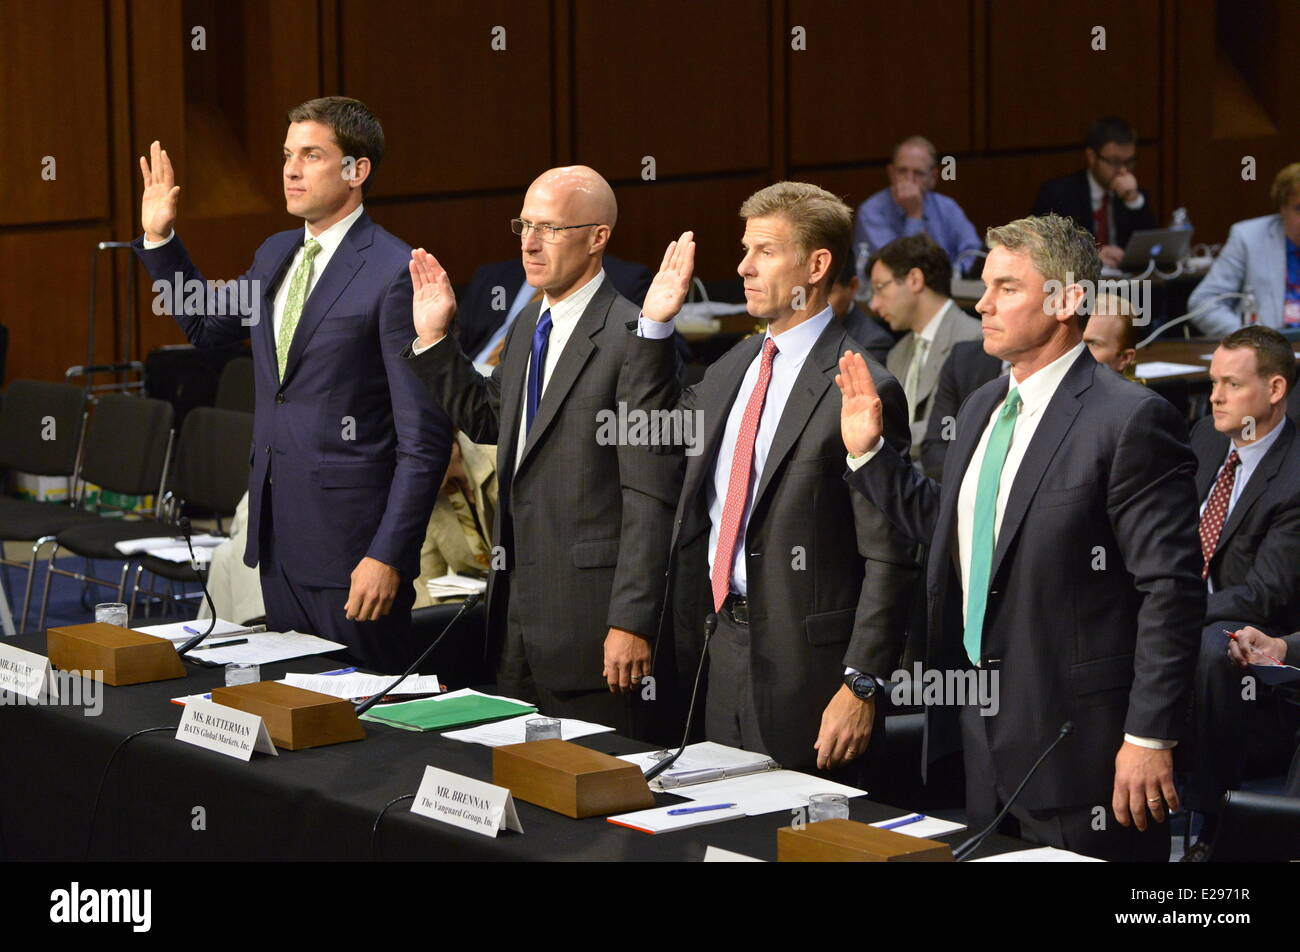 Washington, DC, USA. 17th June, 2013. A panel of financial executives is sworn in to testify on conflicts of interest and high-speed trading in U.S. stock markets before a subcommittee of the Senate Homeland Security and Government Affairs Committee. From left the panel includes: THOMAS W. FARLEY, president of NYSE Group; JOSEPH P. RATTERMAN, CEO of BATS Global Markets; JOSEPH P. BRENNAN, principal and head of Global Equity Index Group, The Vanguard Group, Inc., and STEVEN QUIRK, .at TD Ameritrade. © Jay Mallin/ZUMAPRESS.com/Alamy Live News Stock Photo